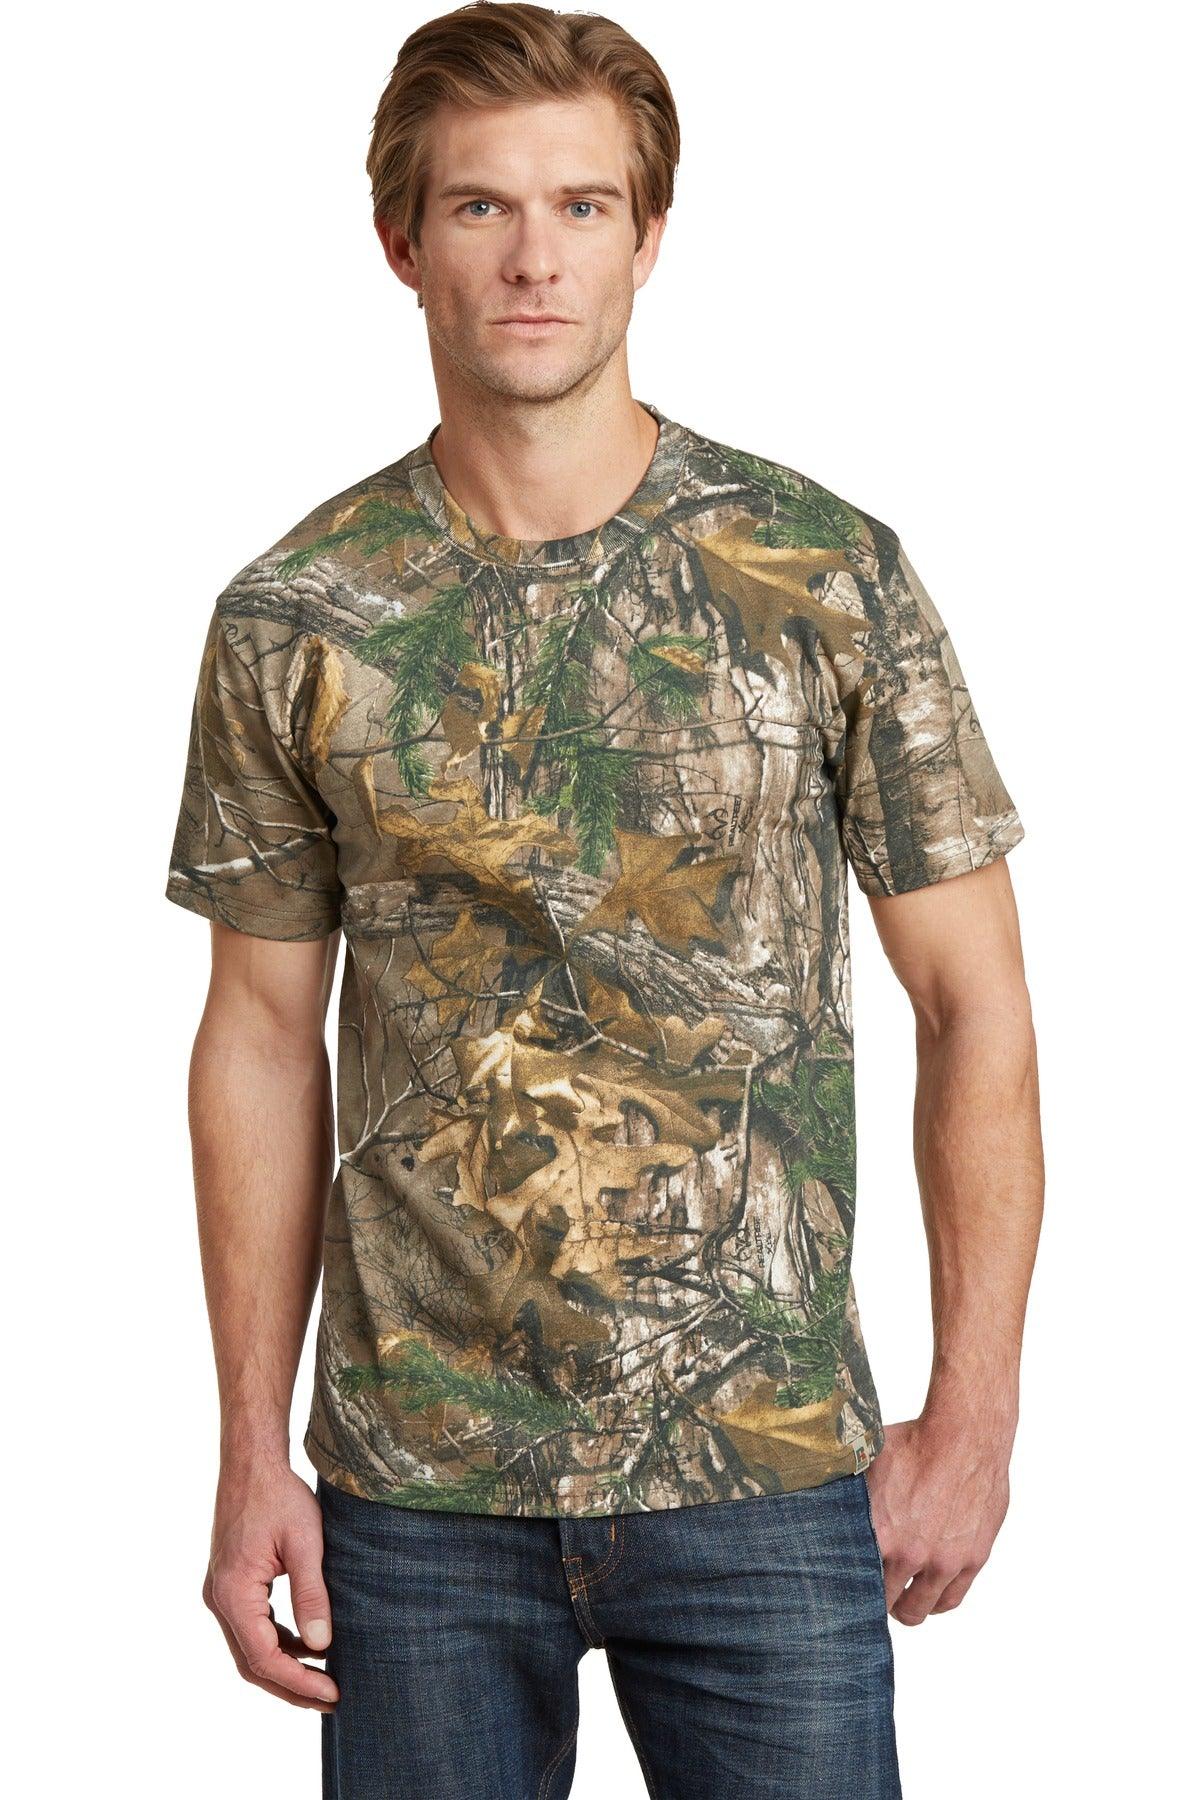 Russell Outdoors - Realtree Explorer 100% Cotton T-Shirt. NP0021R - Dresses Max